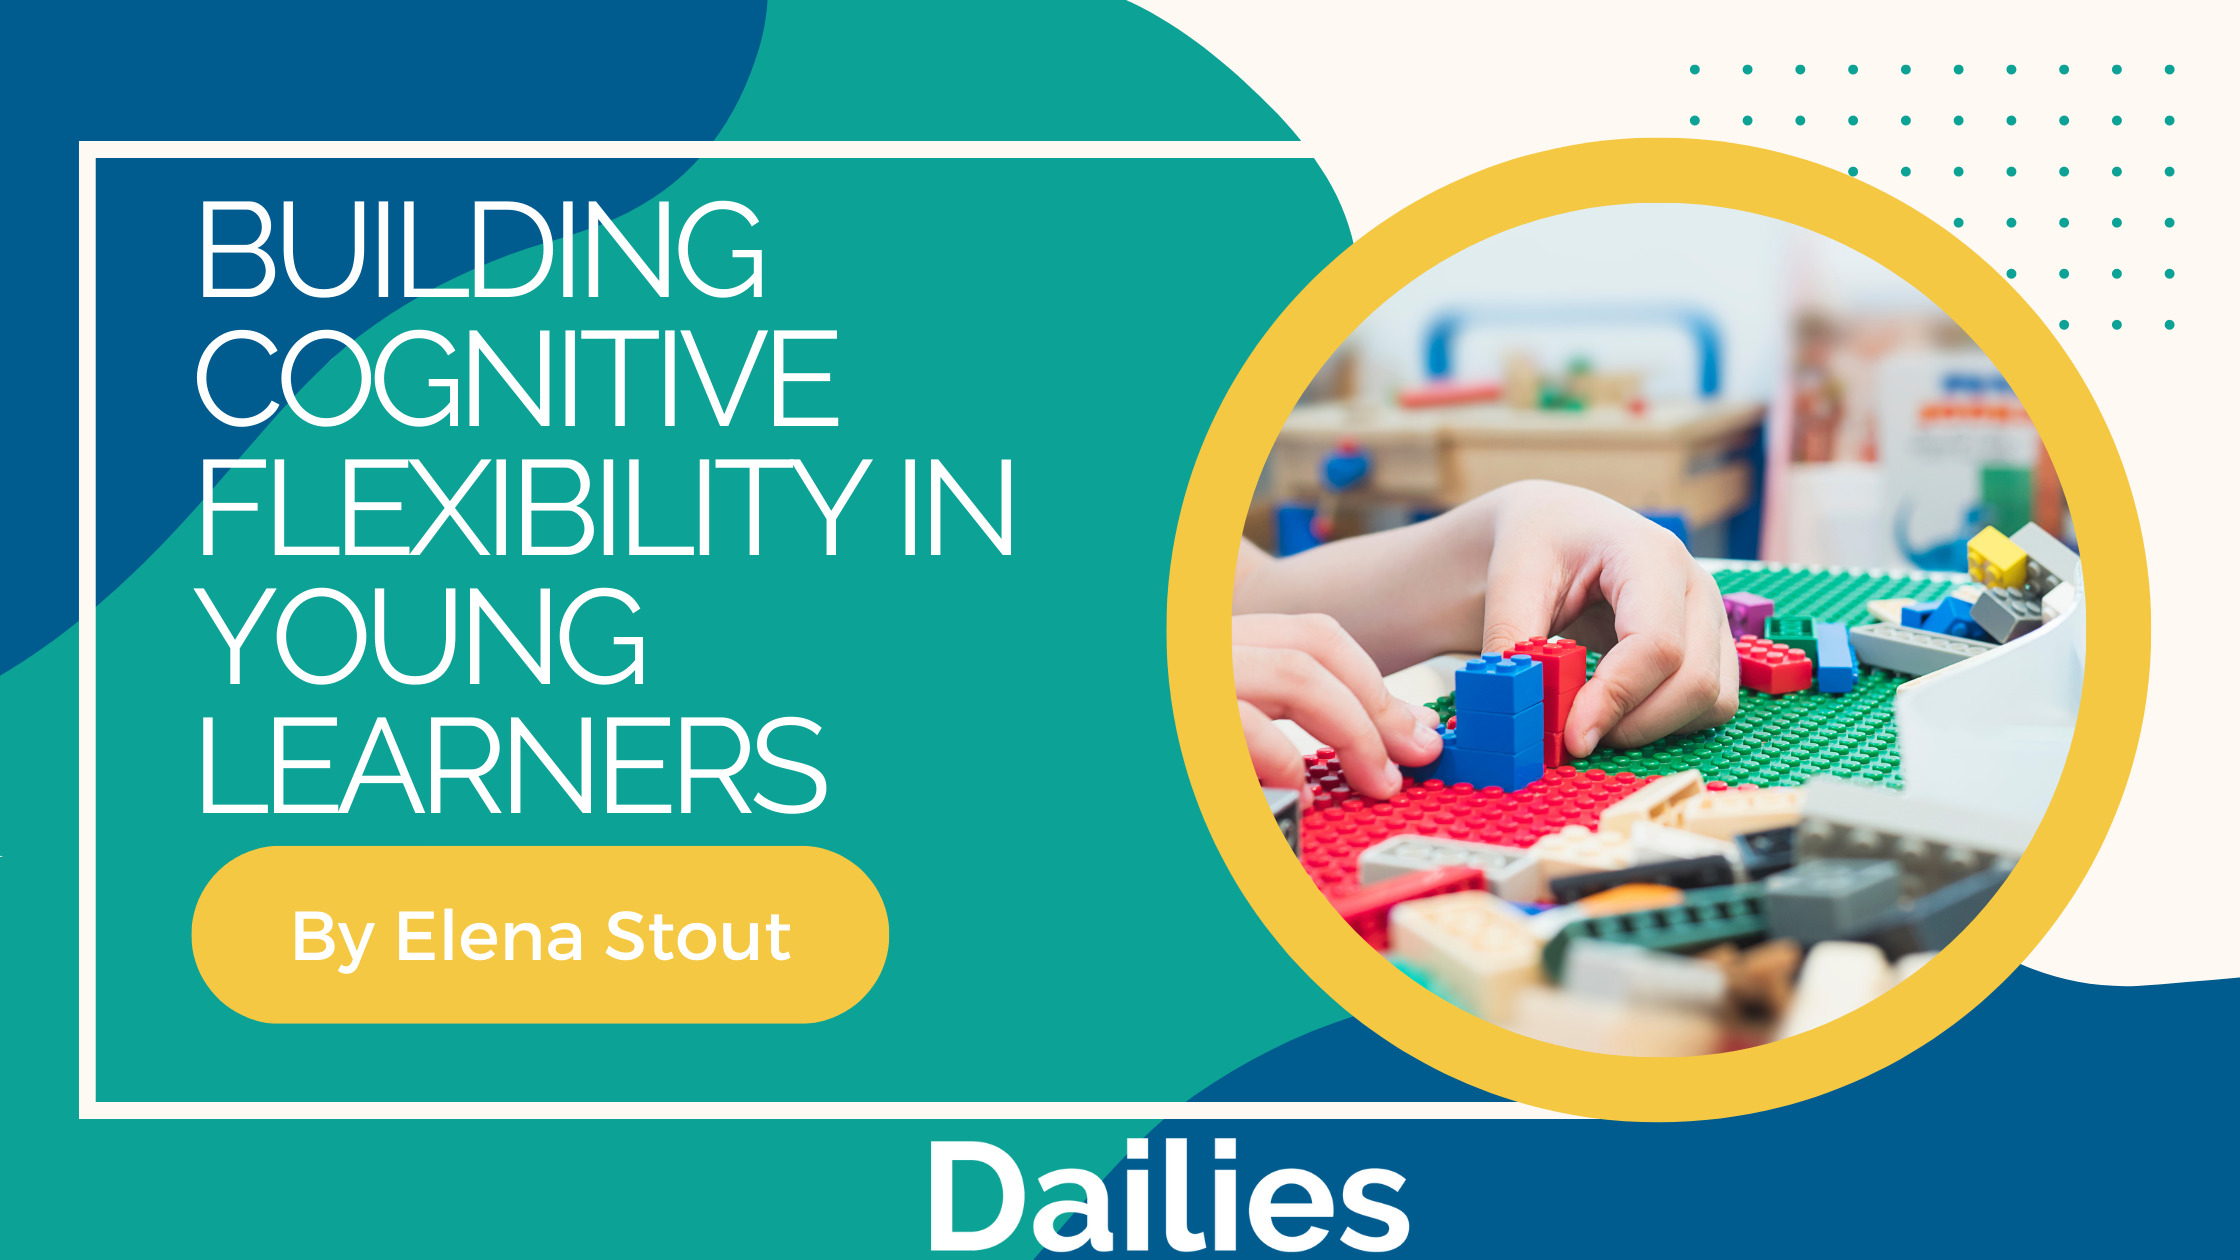 Building Cognitive Flexibility in Young Learners